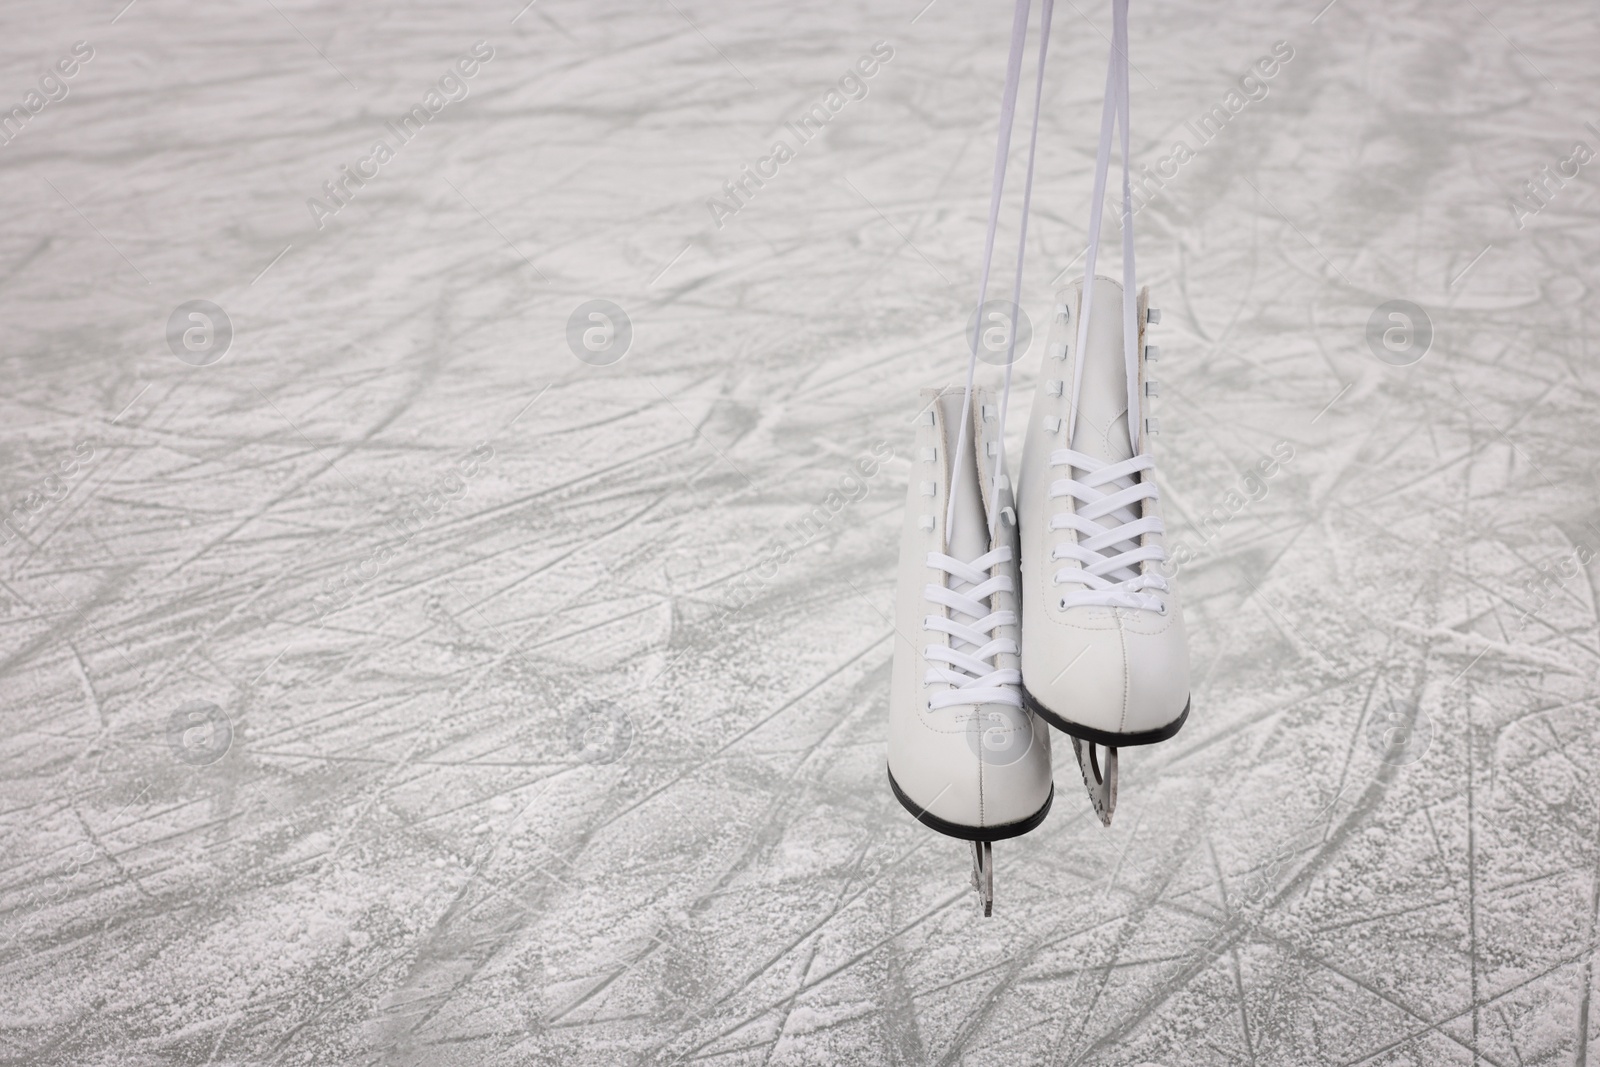 Photo of Pair of figure skates hanging over ice, space for text